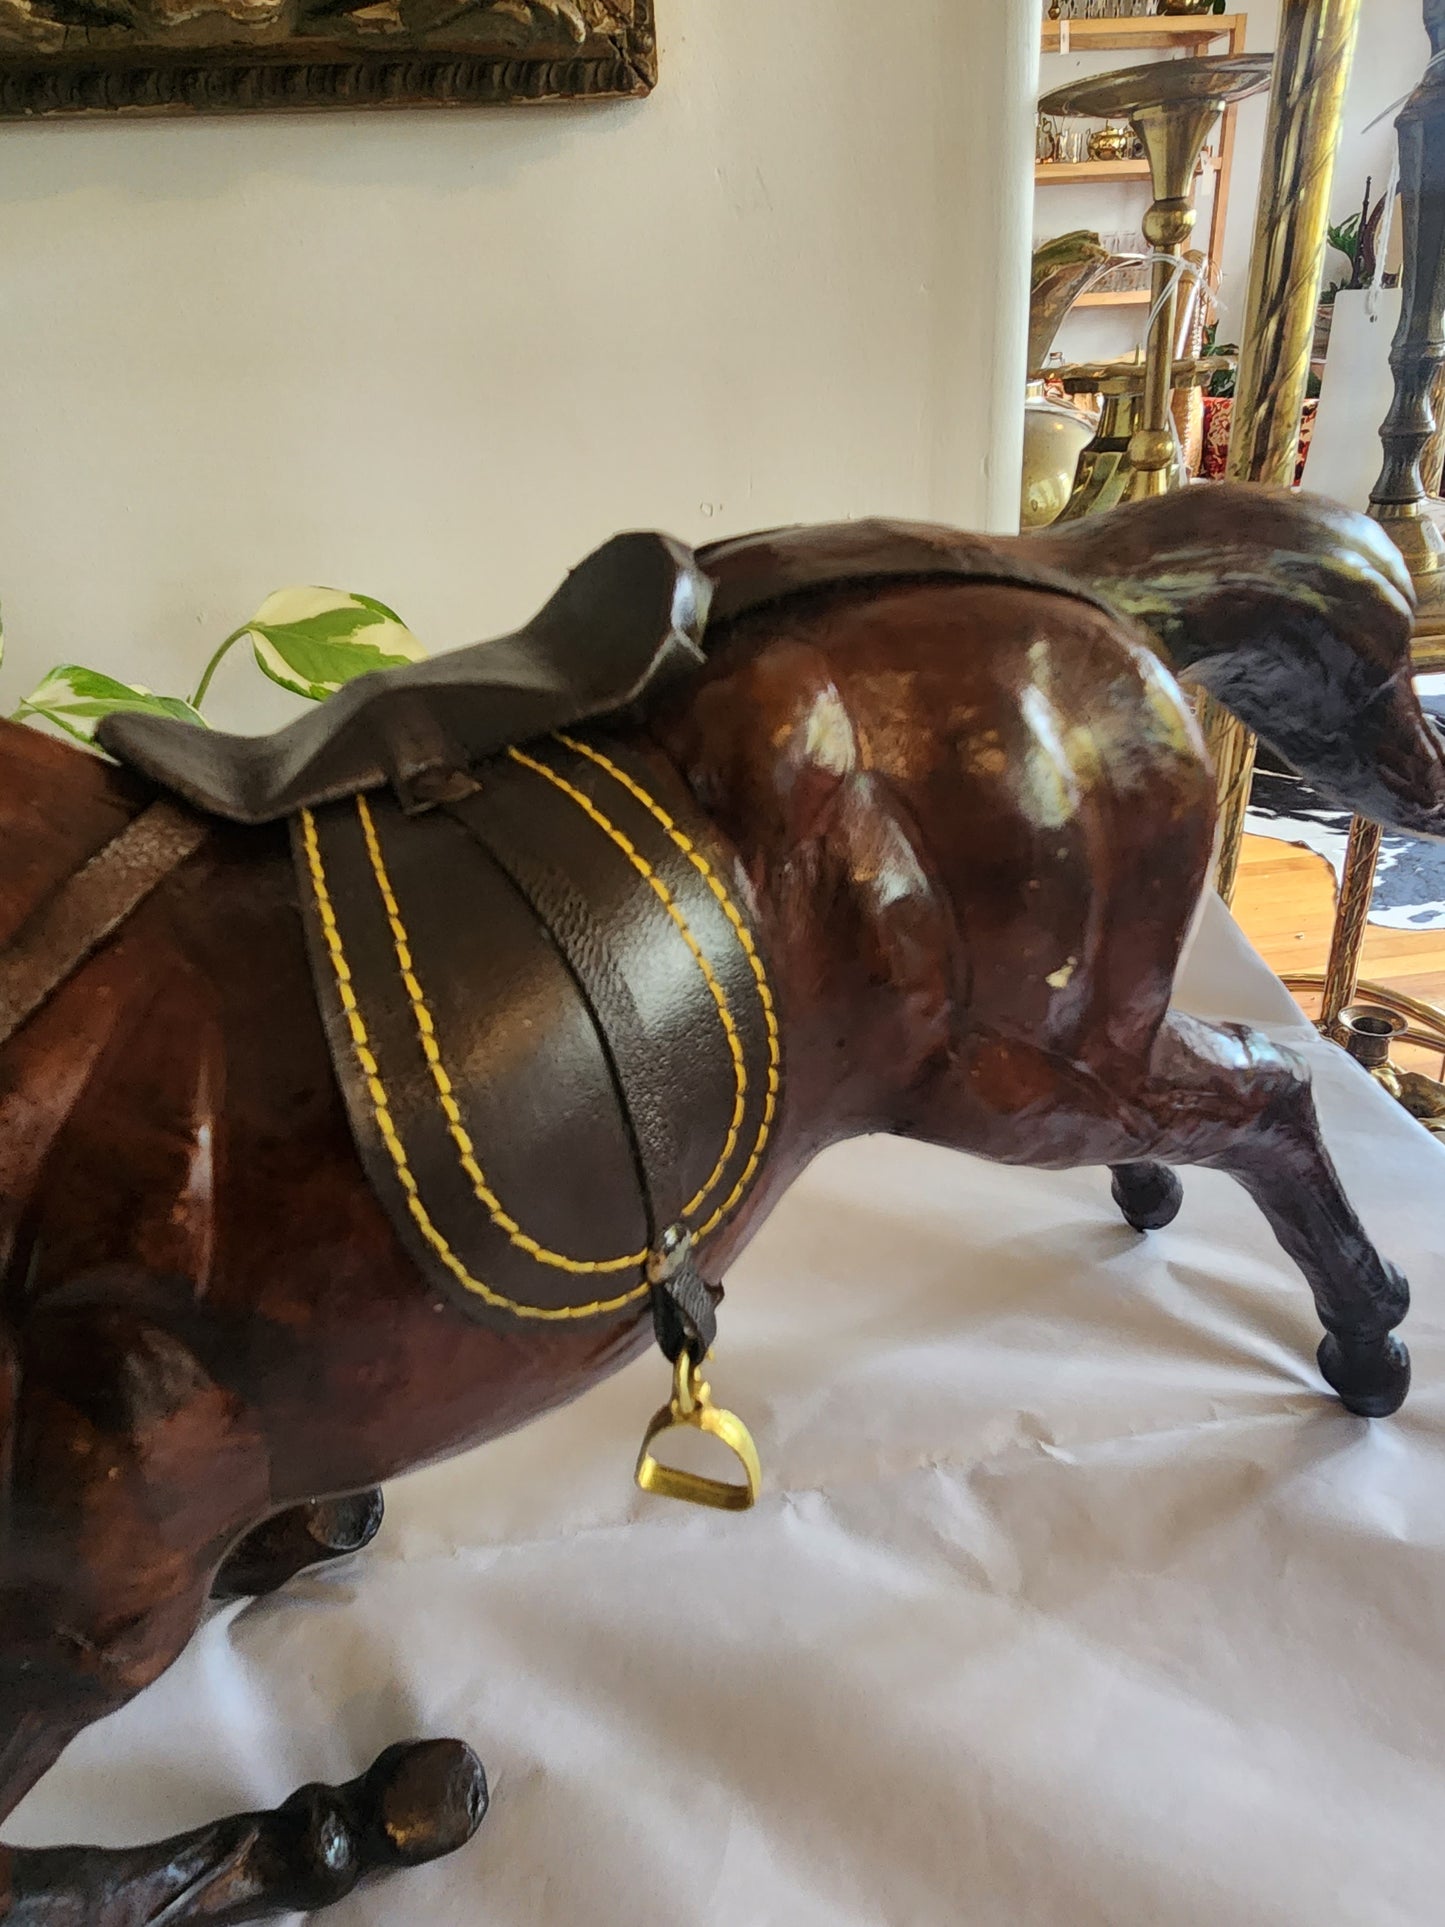 Vintage Leather Horse Statue